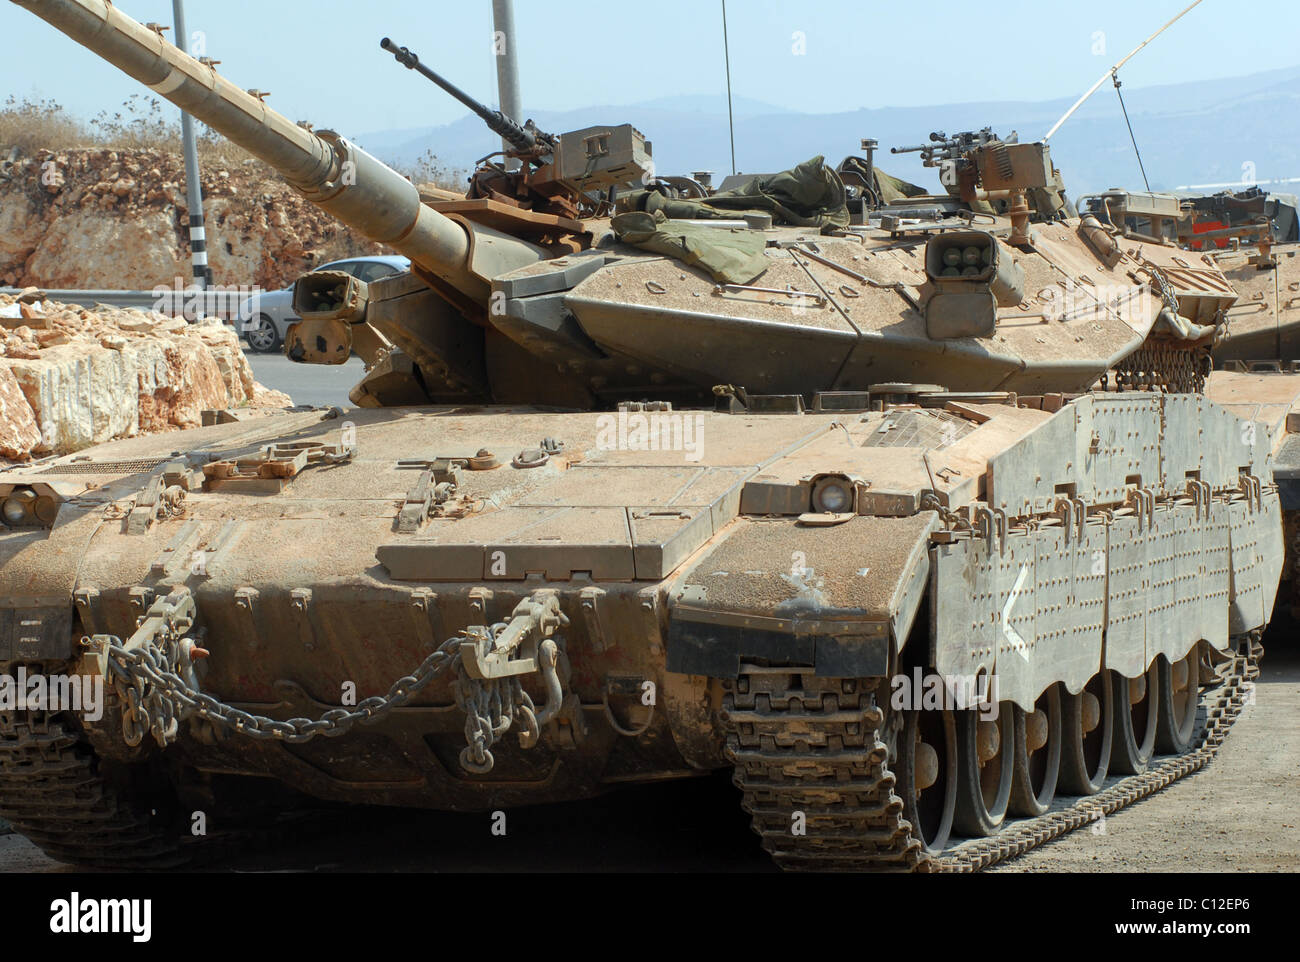 The Merkava (Hebrew: מרכבה (help·info), Chariot) is the main battle tank of the Israel Defense Forces. Stock Photo